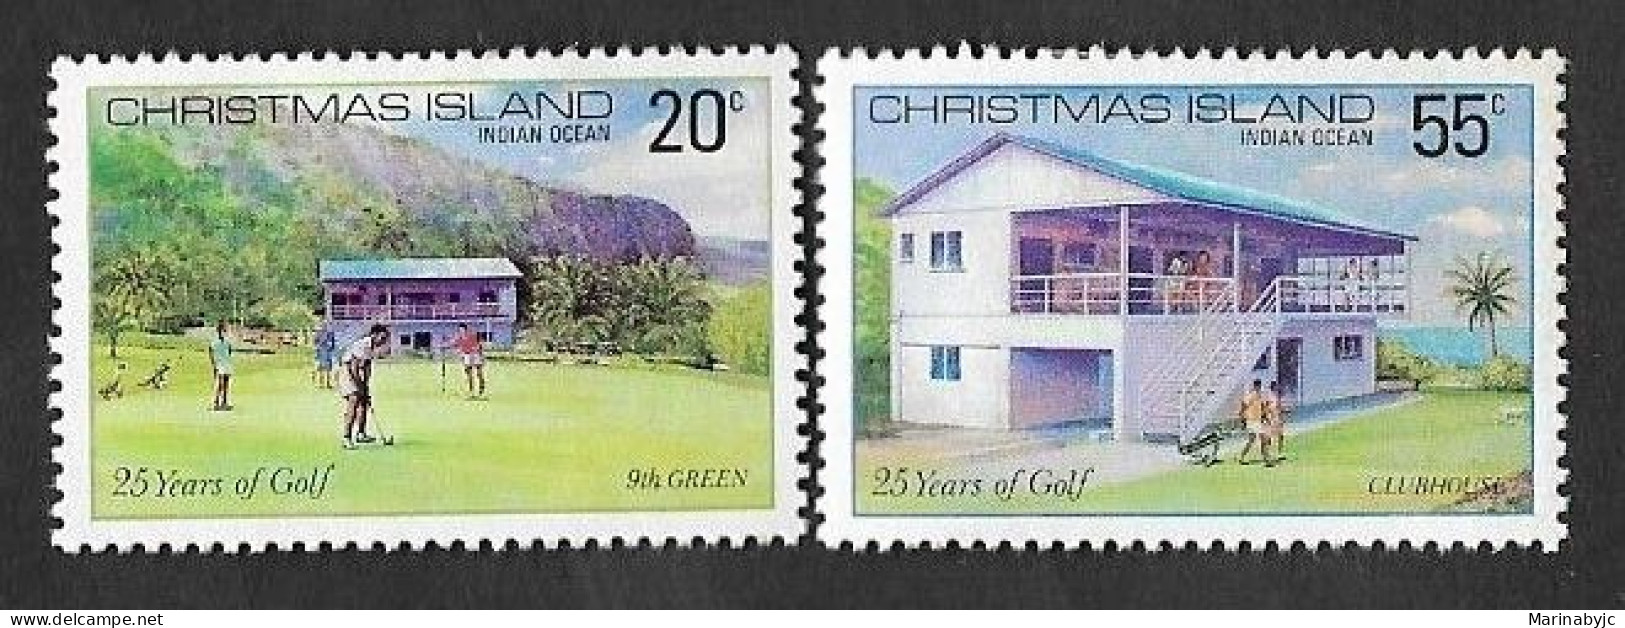 SD)1988 SPORTS SERIES CHRISTMAS ISLAND, 25TH ANNIVERSARY OF GOLF, 2 MINT STAMPS - Christmas Island